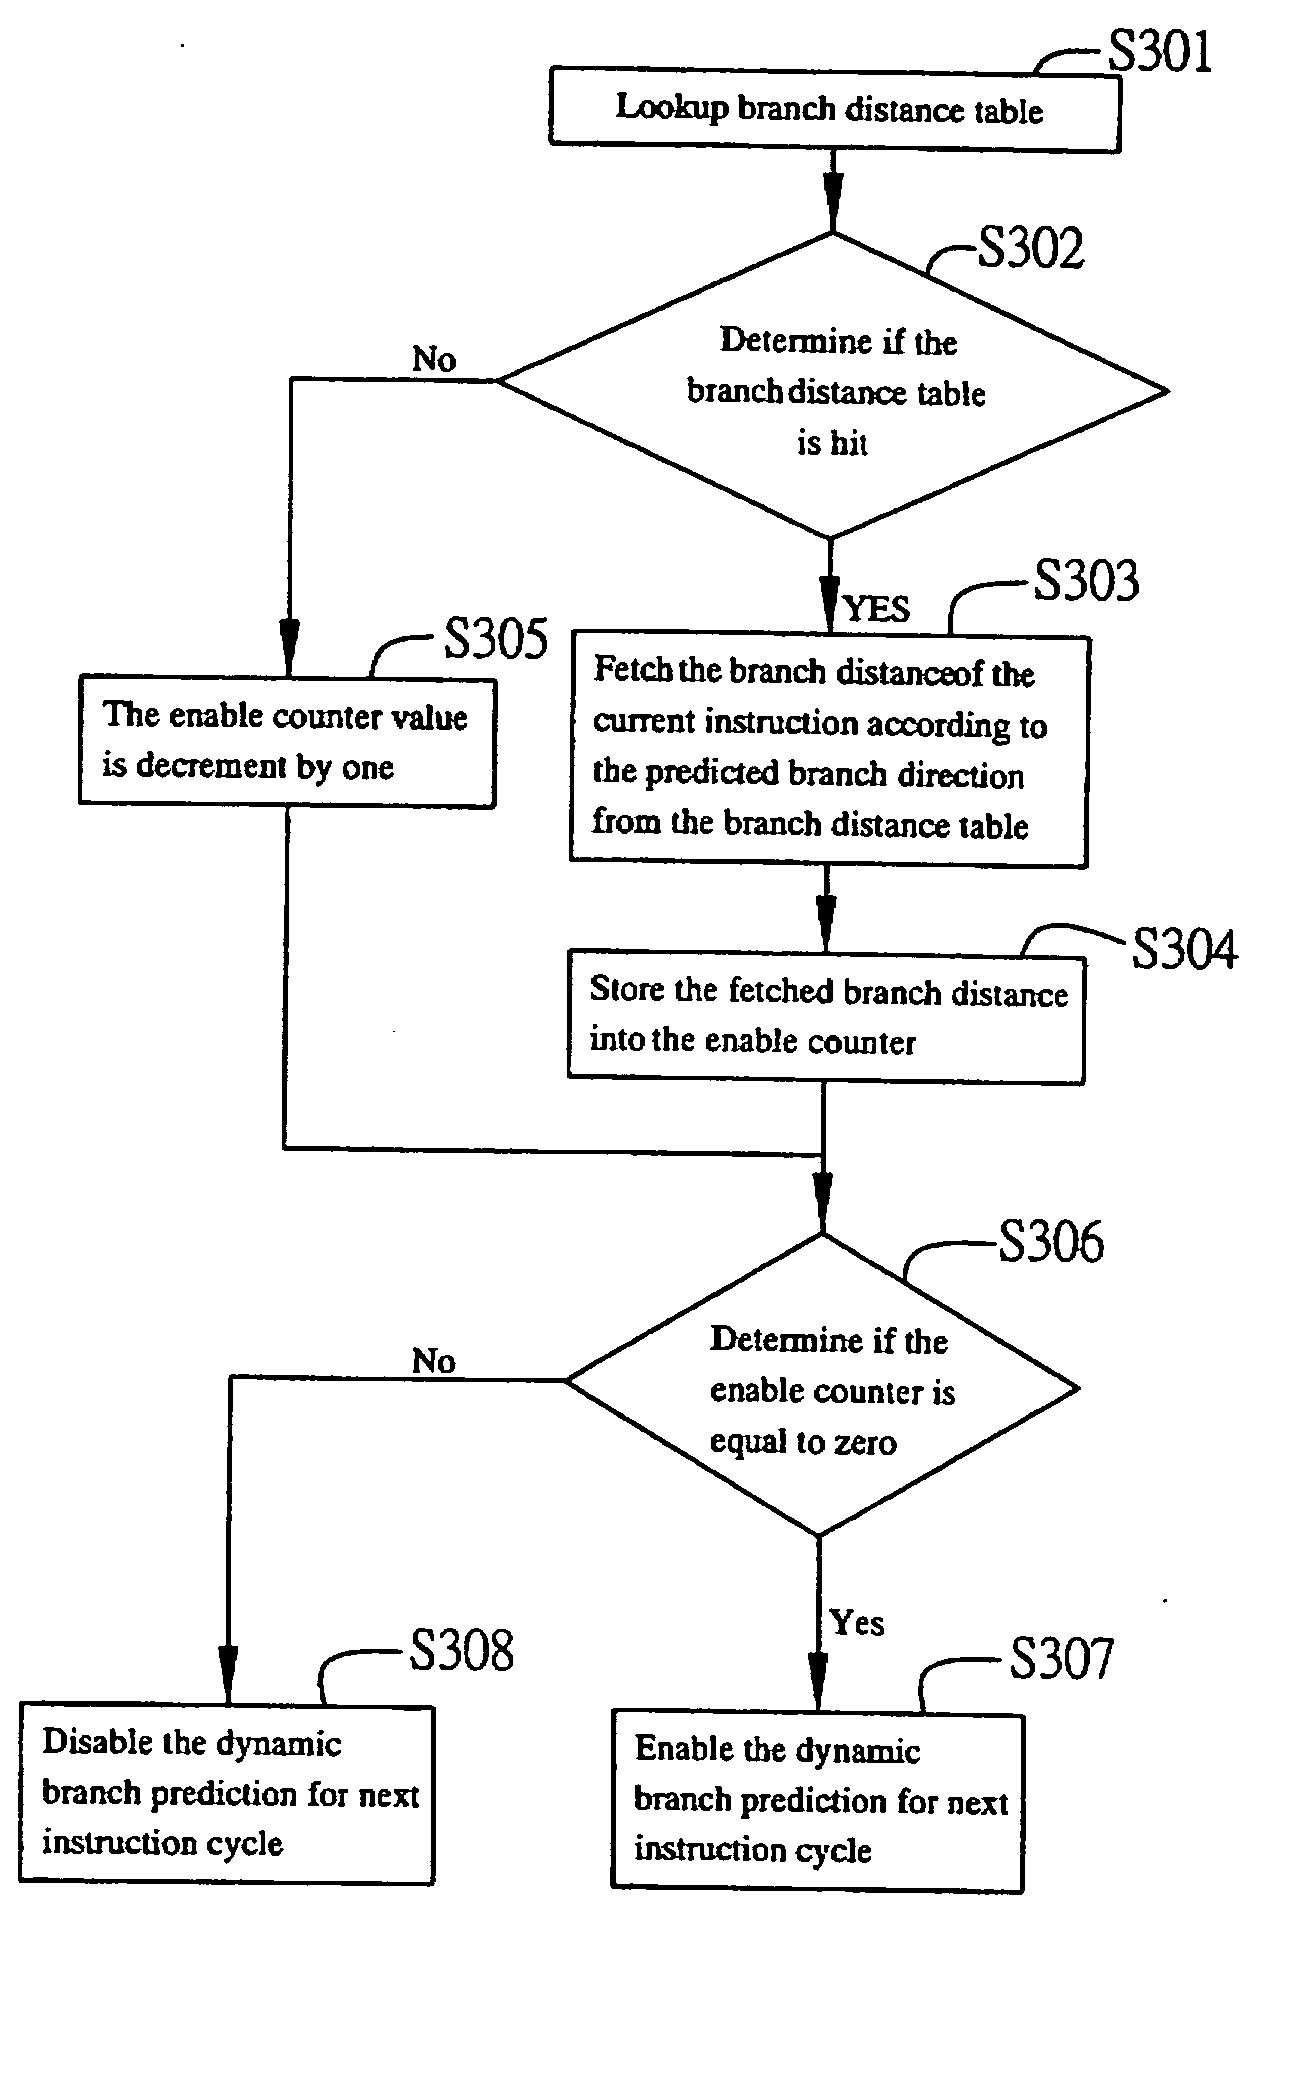 Unnecessary dynamic branch prediction elimination method for low-power